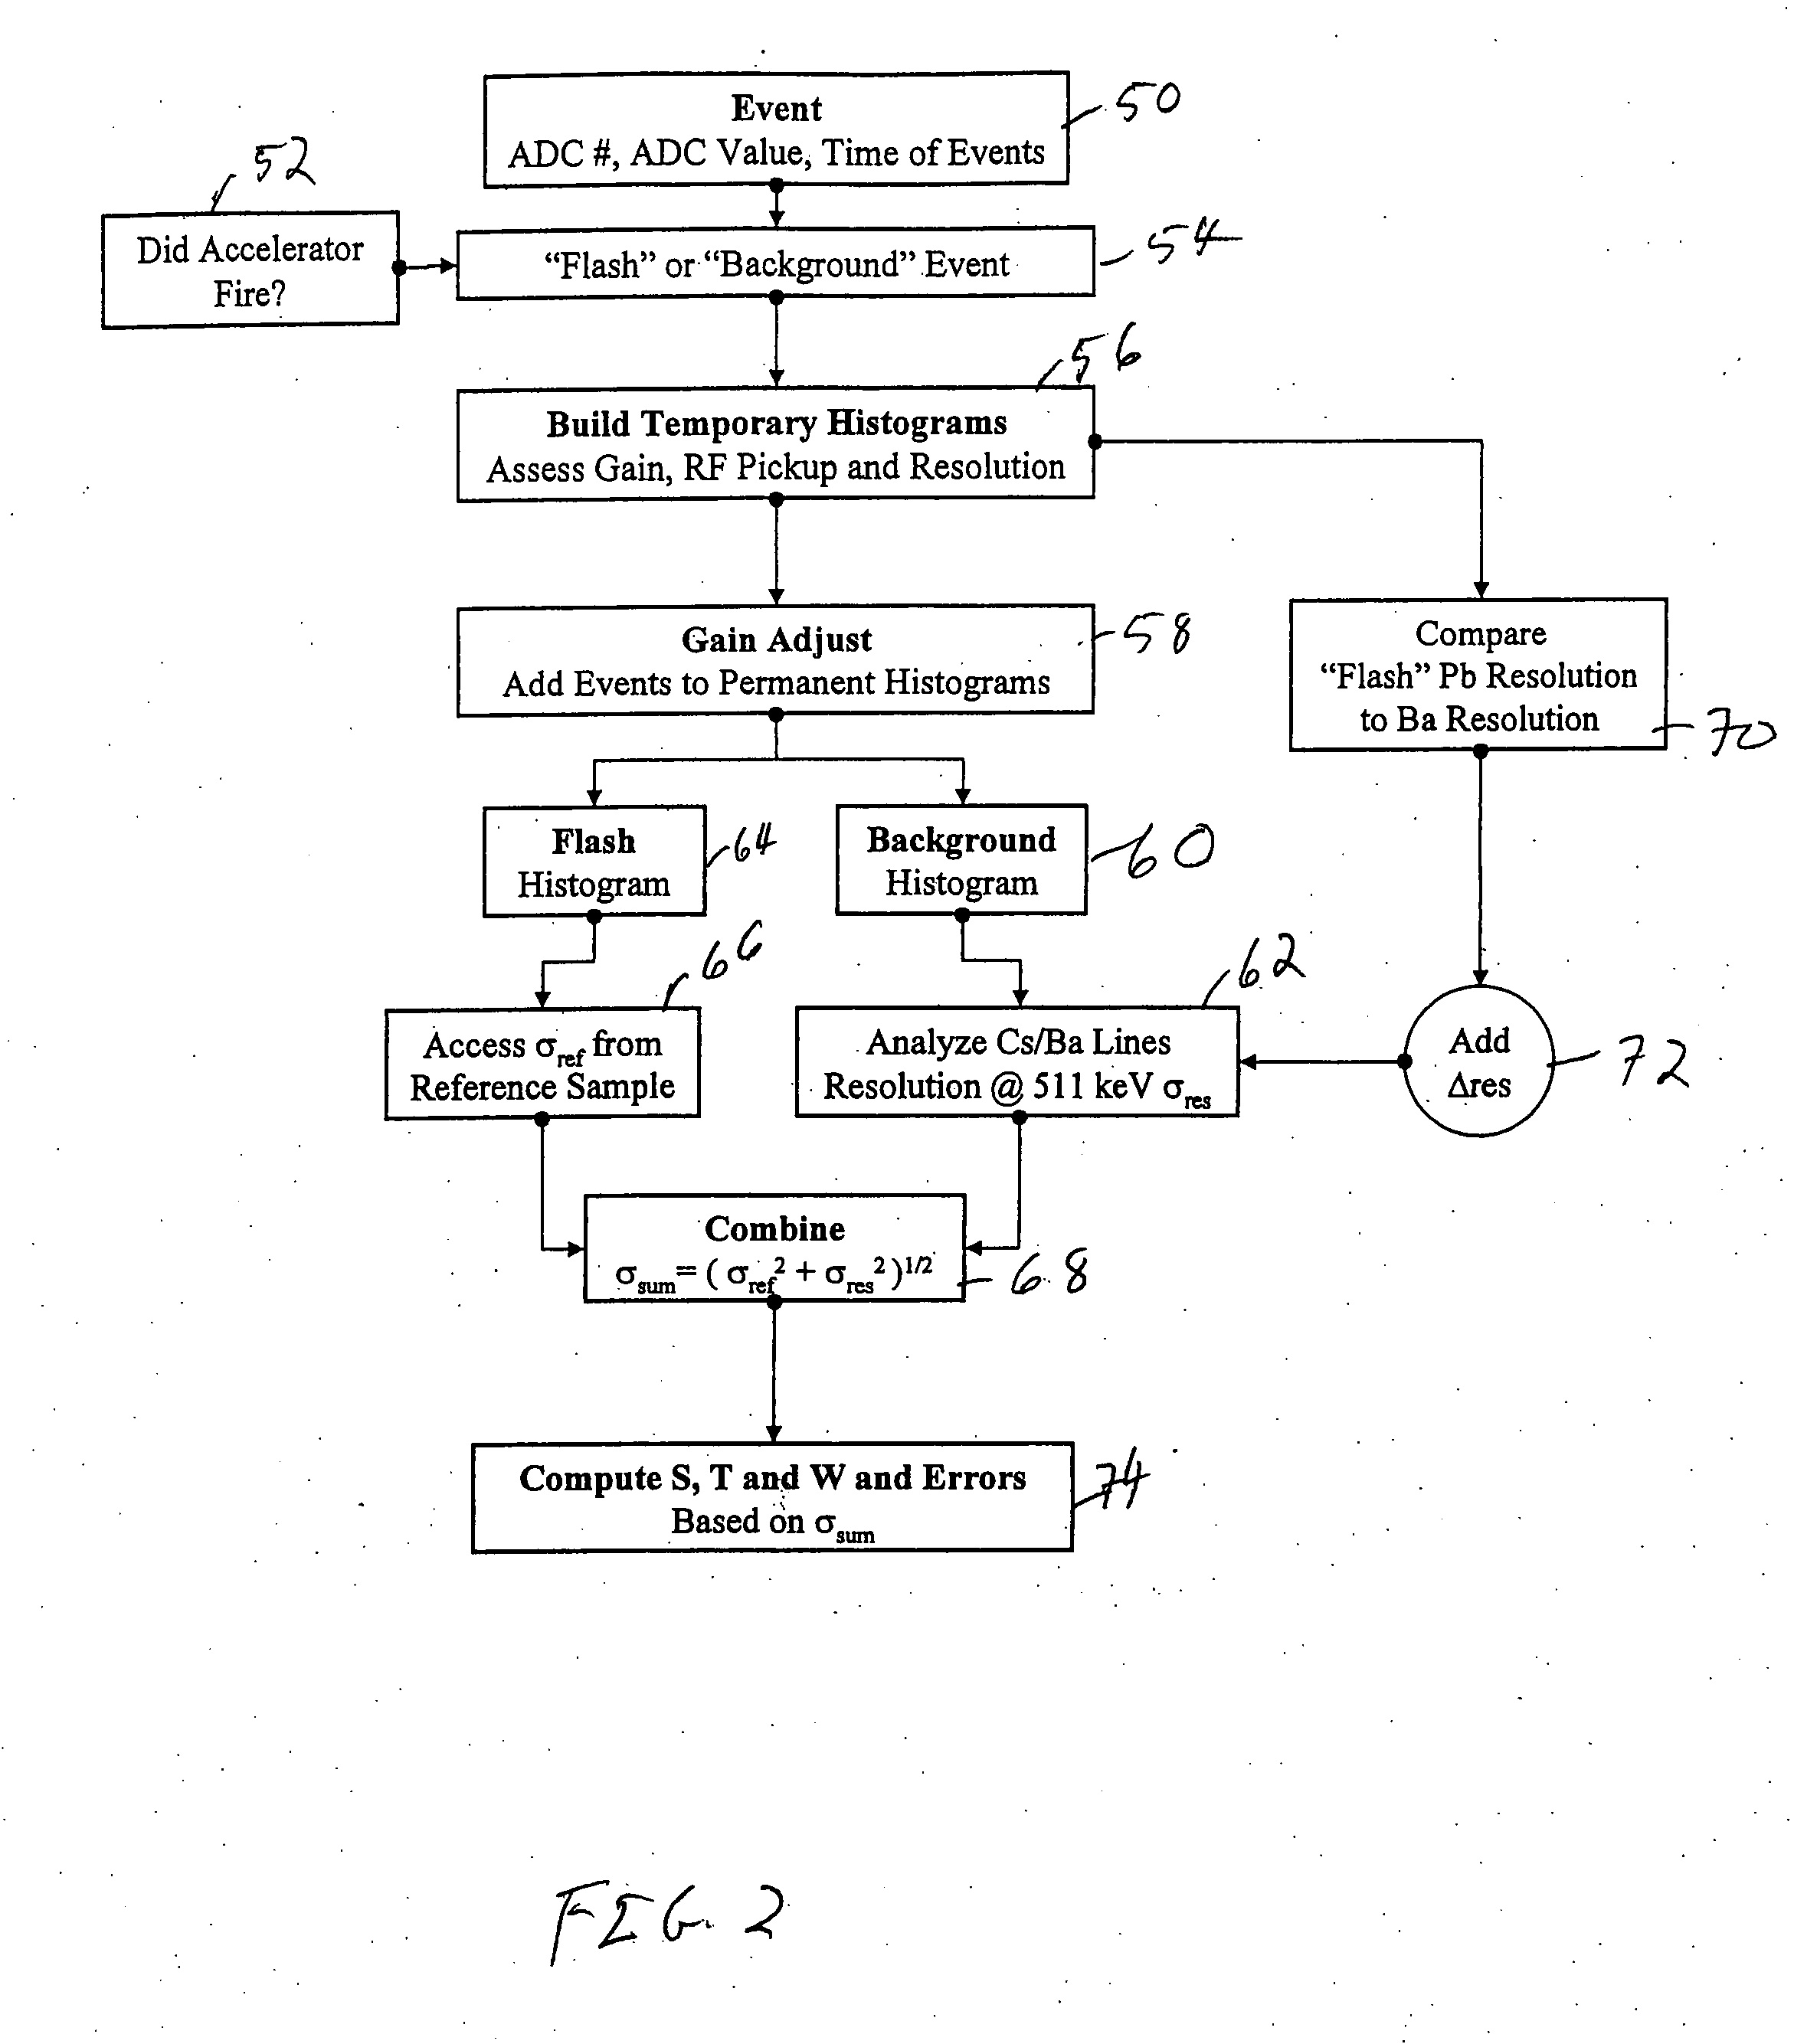 Defect imaging device and method